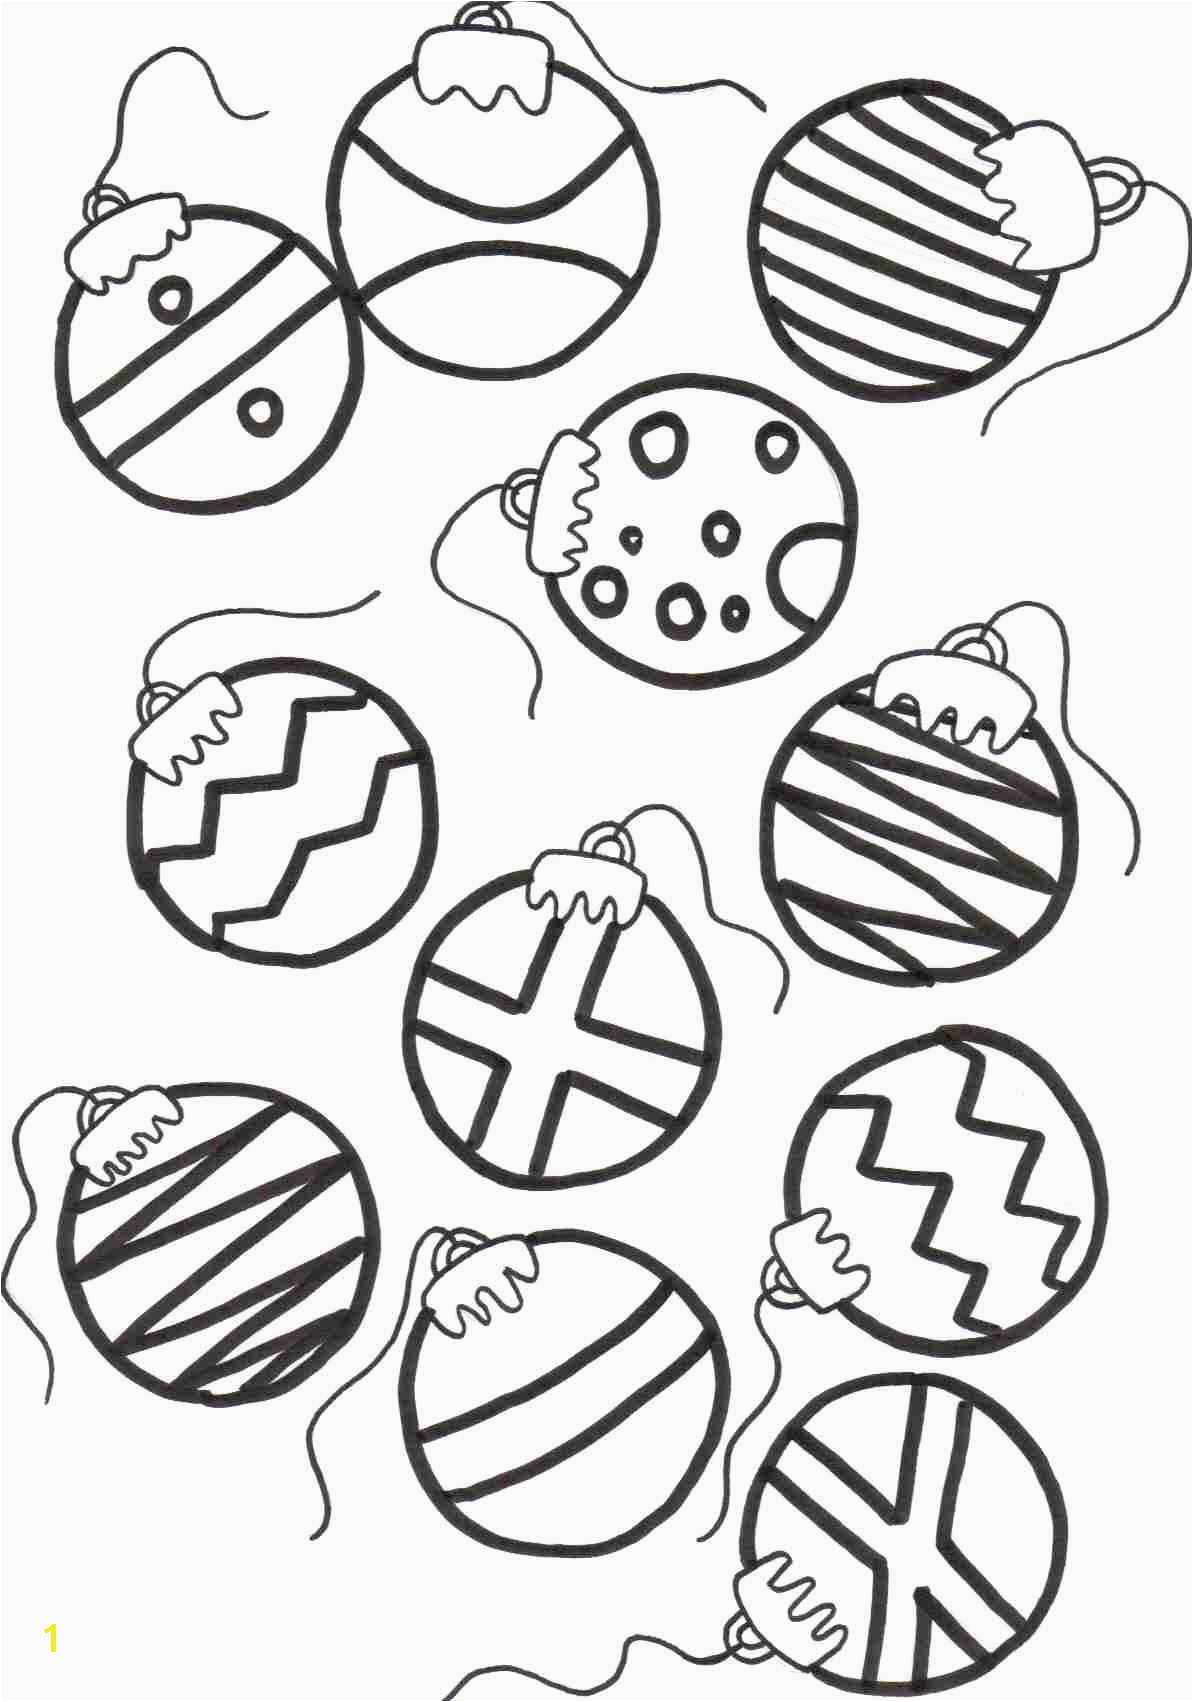 Ornament Coloring Pages ornament Coloring Page Baby Coloring Pages New Media Cache Ec0